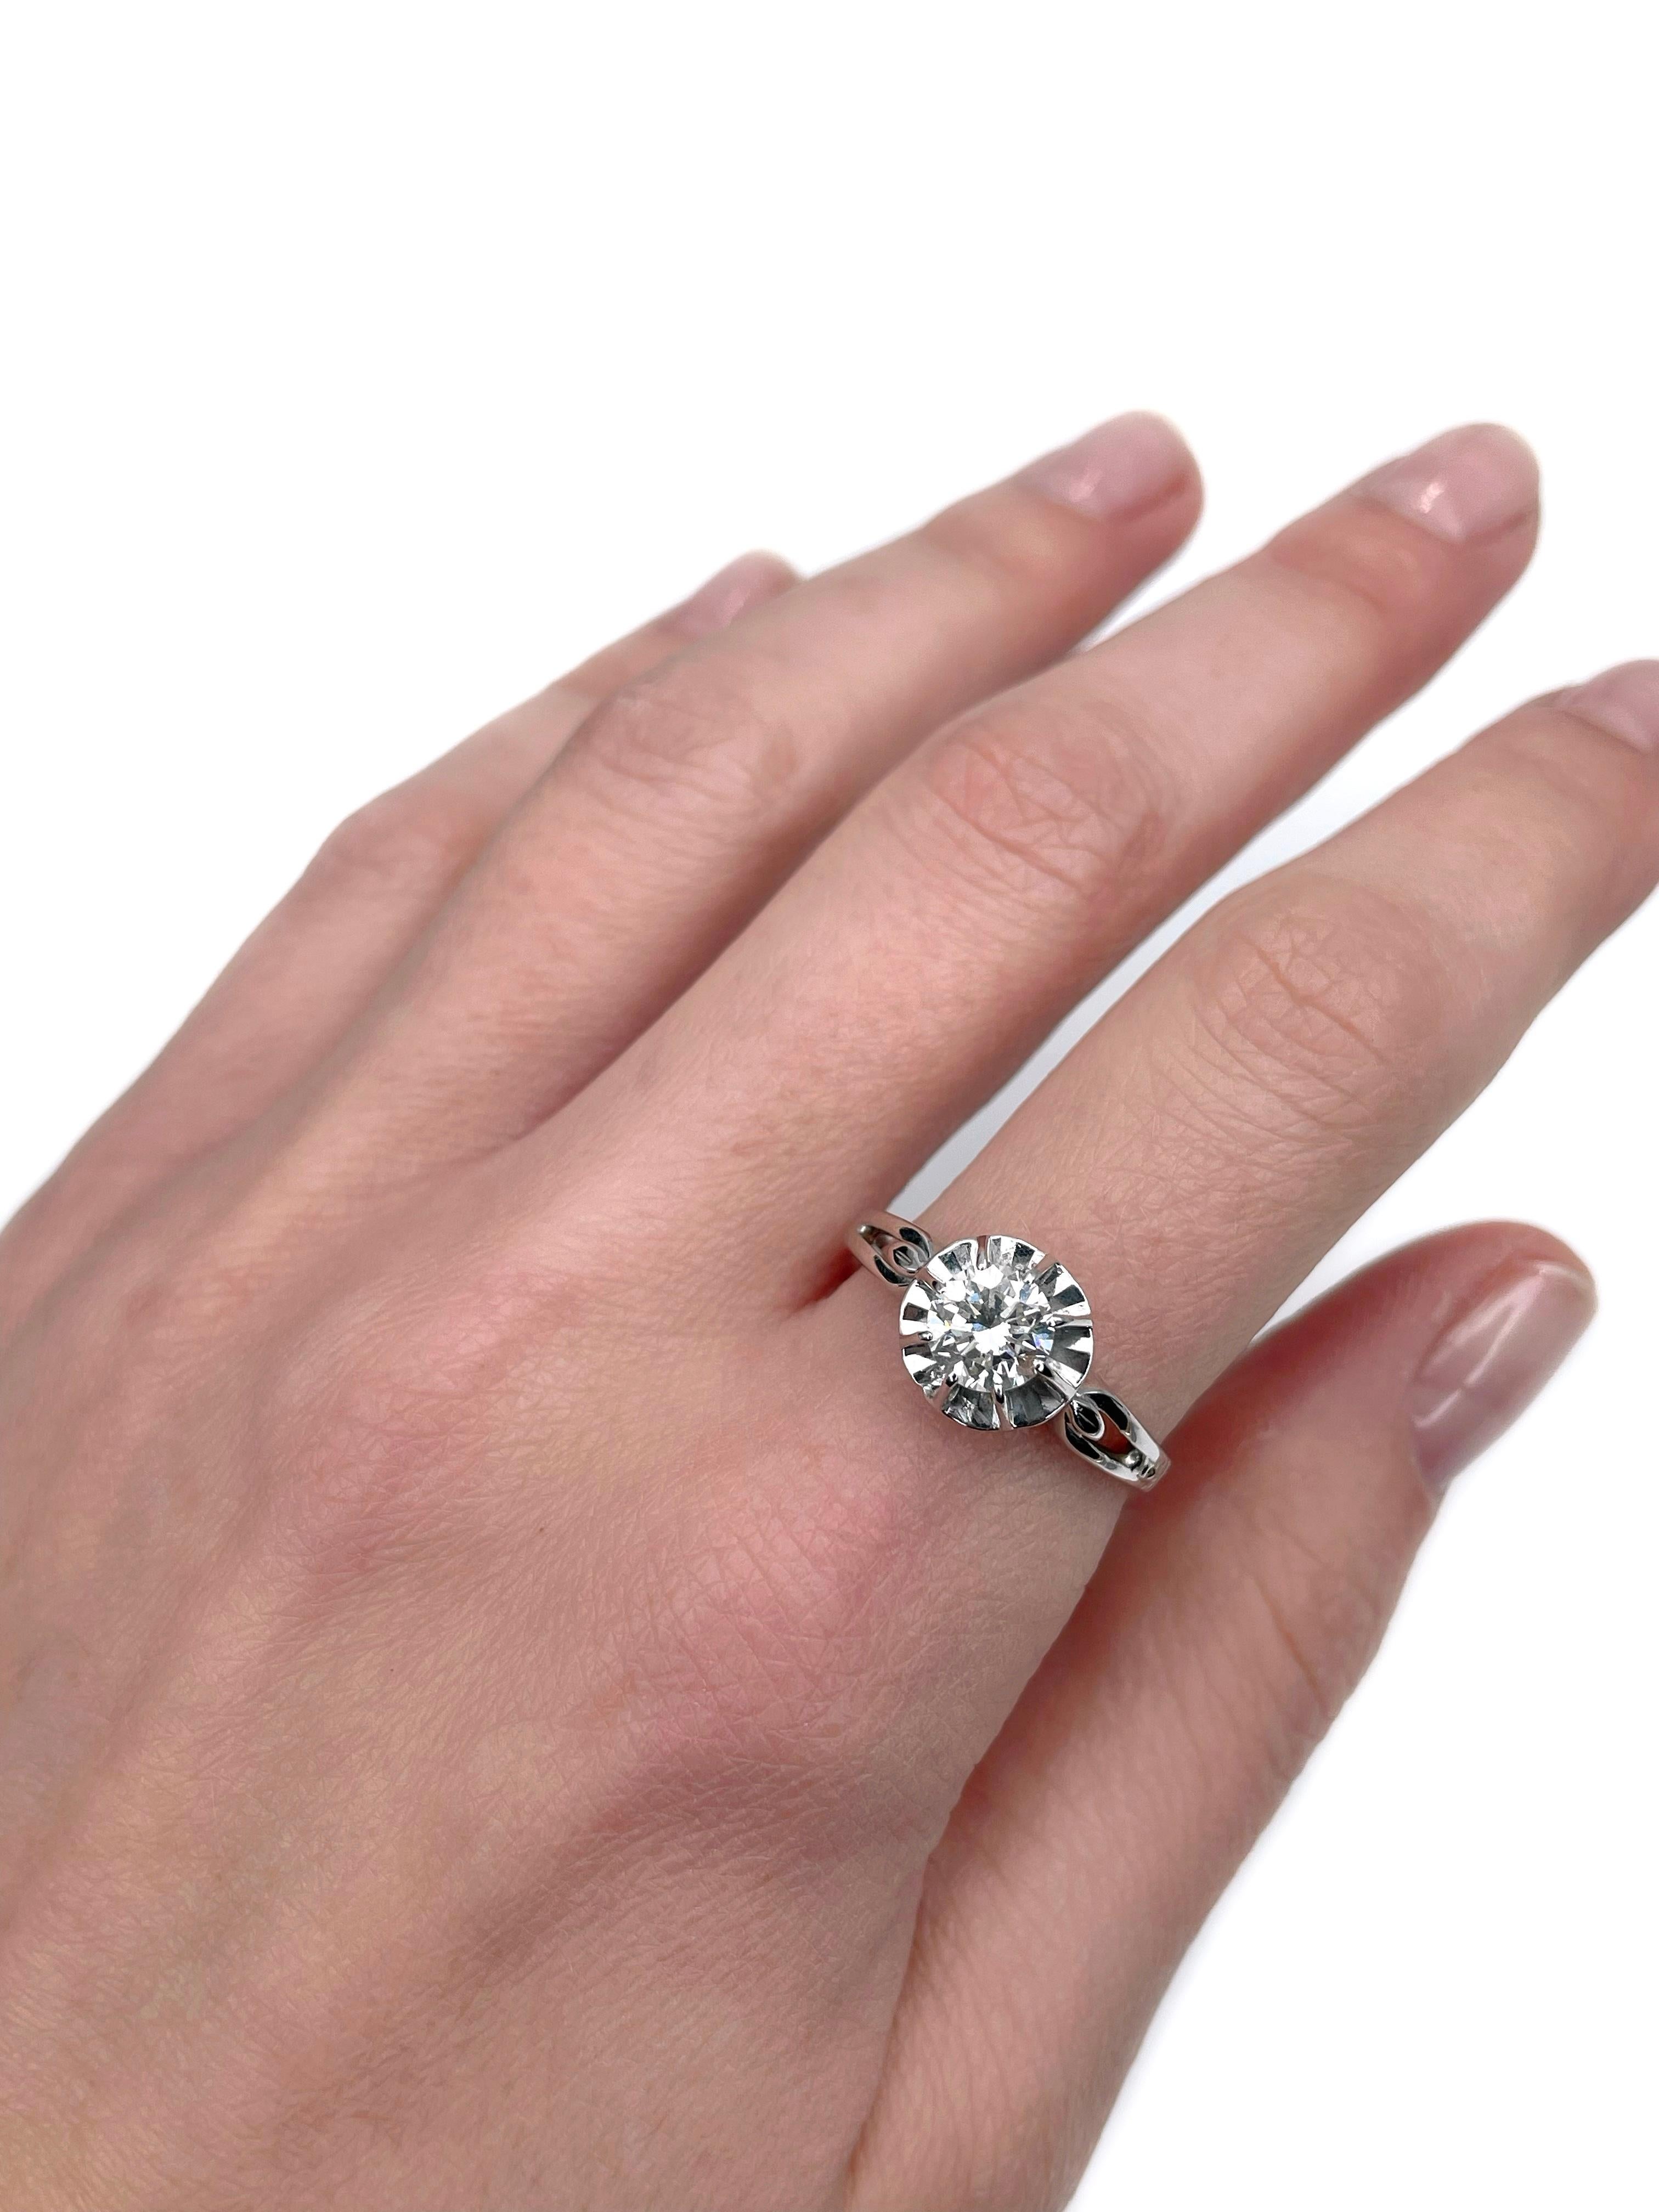 This is a mid century solitaire ring crafted in 18K white gold. Circa 1960. 

The piece features round brilliant cut diamond: 0.85ct, W, VS1. 

Weight: 4.10g
Size: 19 (US 9)

IMPORTANT: please ask about the possibility to resize before purchase.